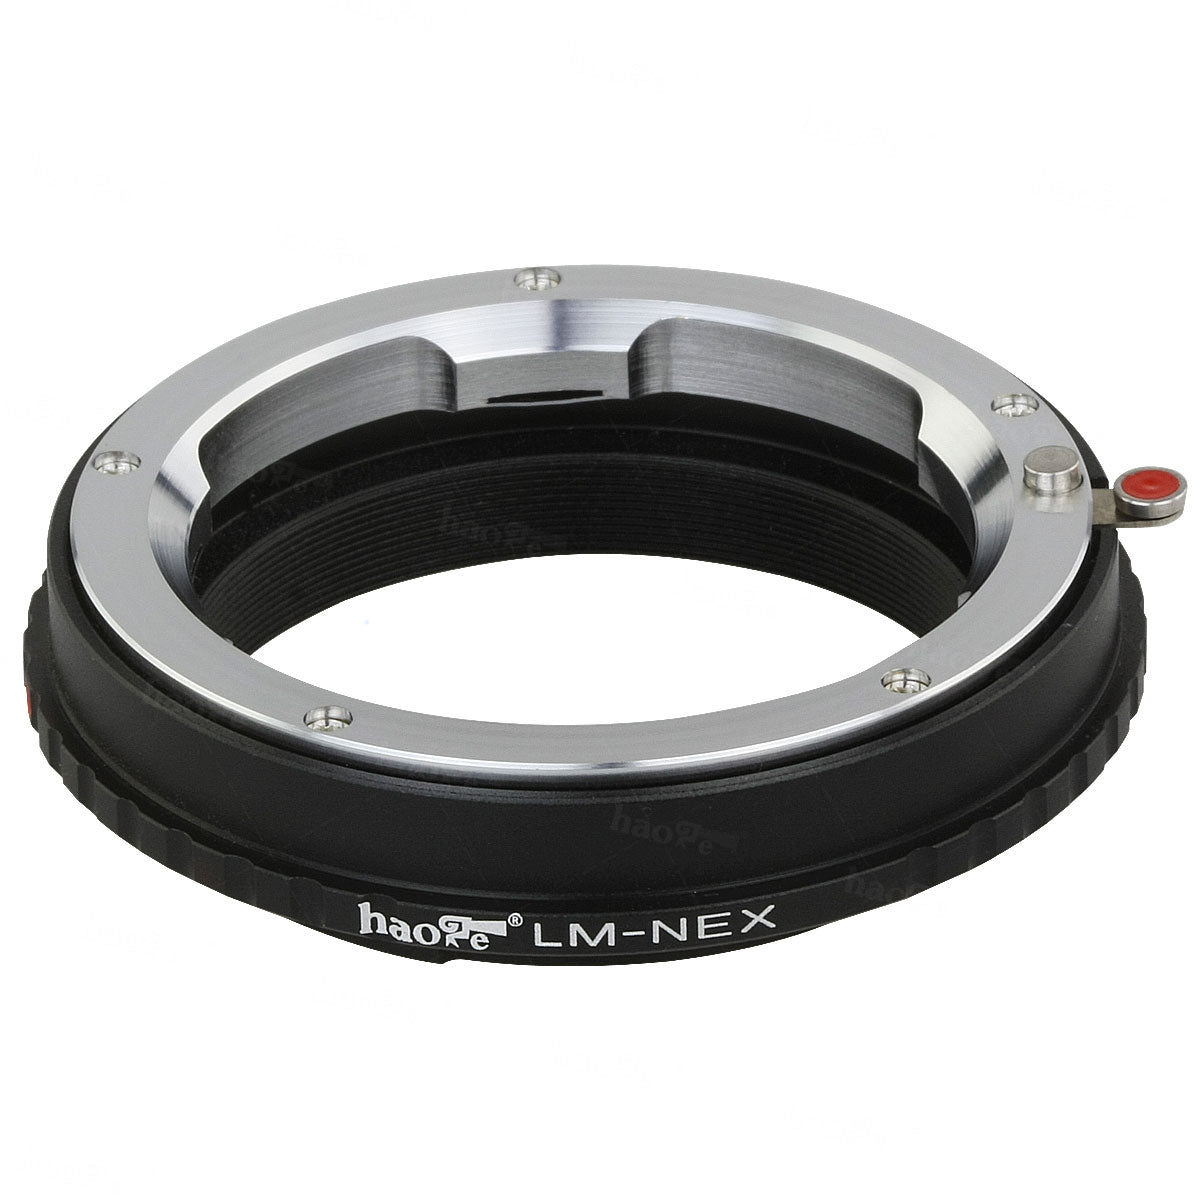 Haoge Lens Mount Adapter for Leica M LM Mount Lens to Sony E-mount NEX Camera such as NEX-3, NEX-5, NEX-5N, NEX-7, NEX-7N, NEX-C3, NEX-F3, a6300, a6000, a5000, a3500, a3000, NEX-VG10, VG20